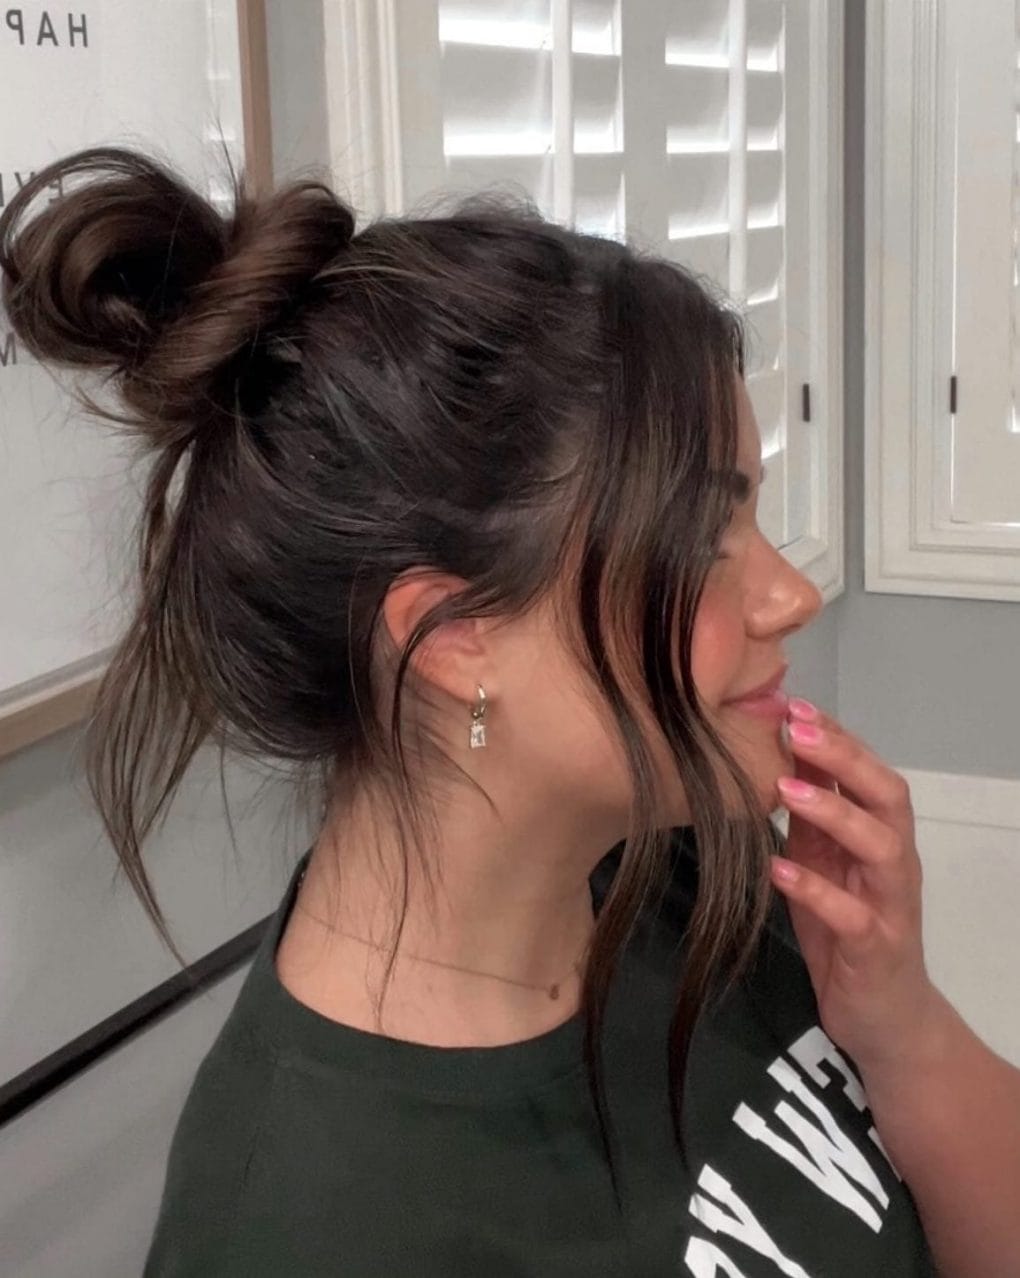 Casual top knot with loose strands in dark color for a laid-back softball style